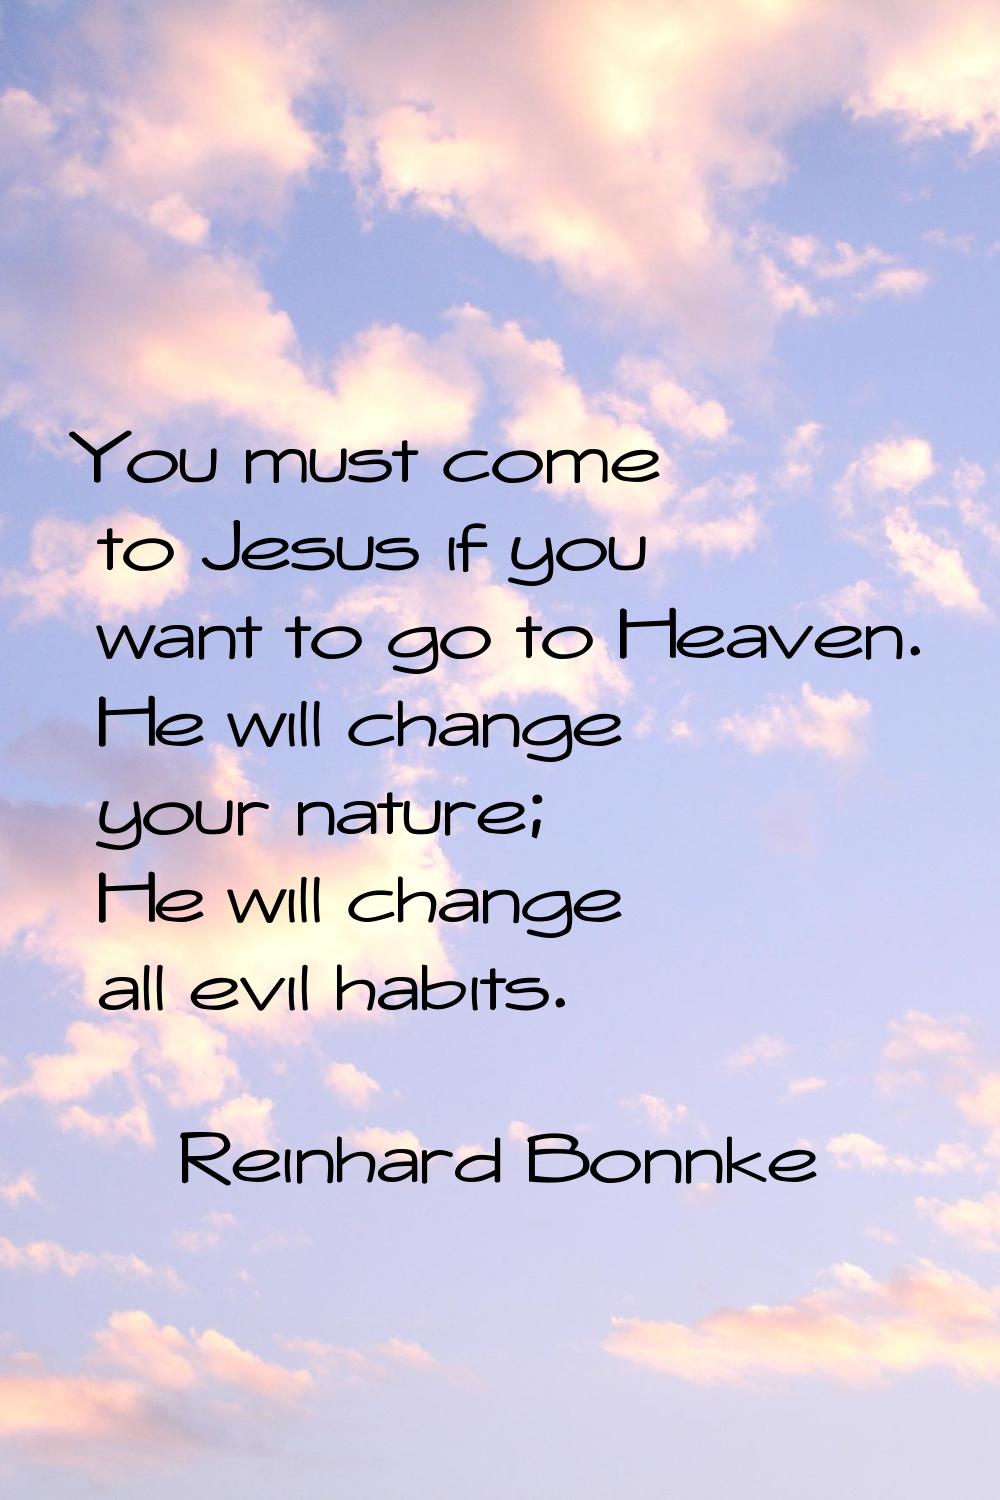 You must come to Jesus if you want to go to Heaven. He will change your nature; He will change all 